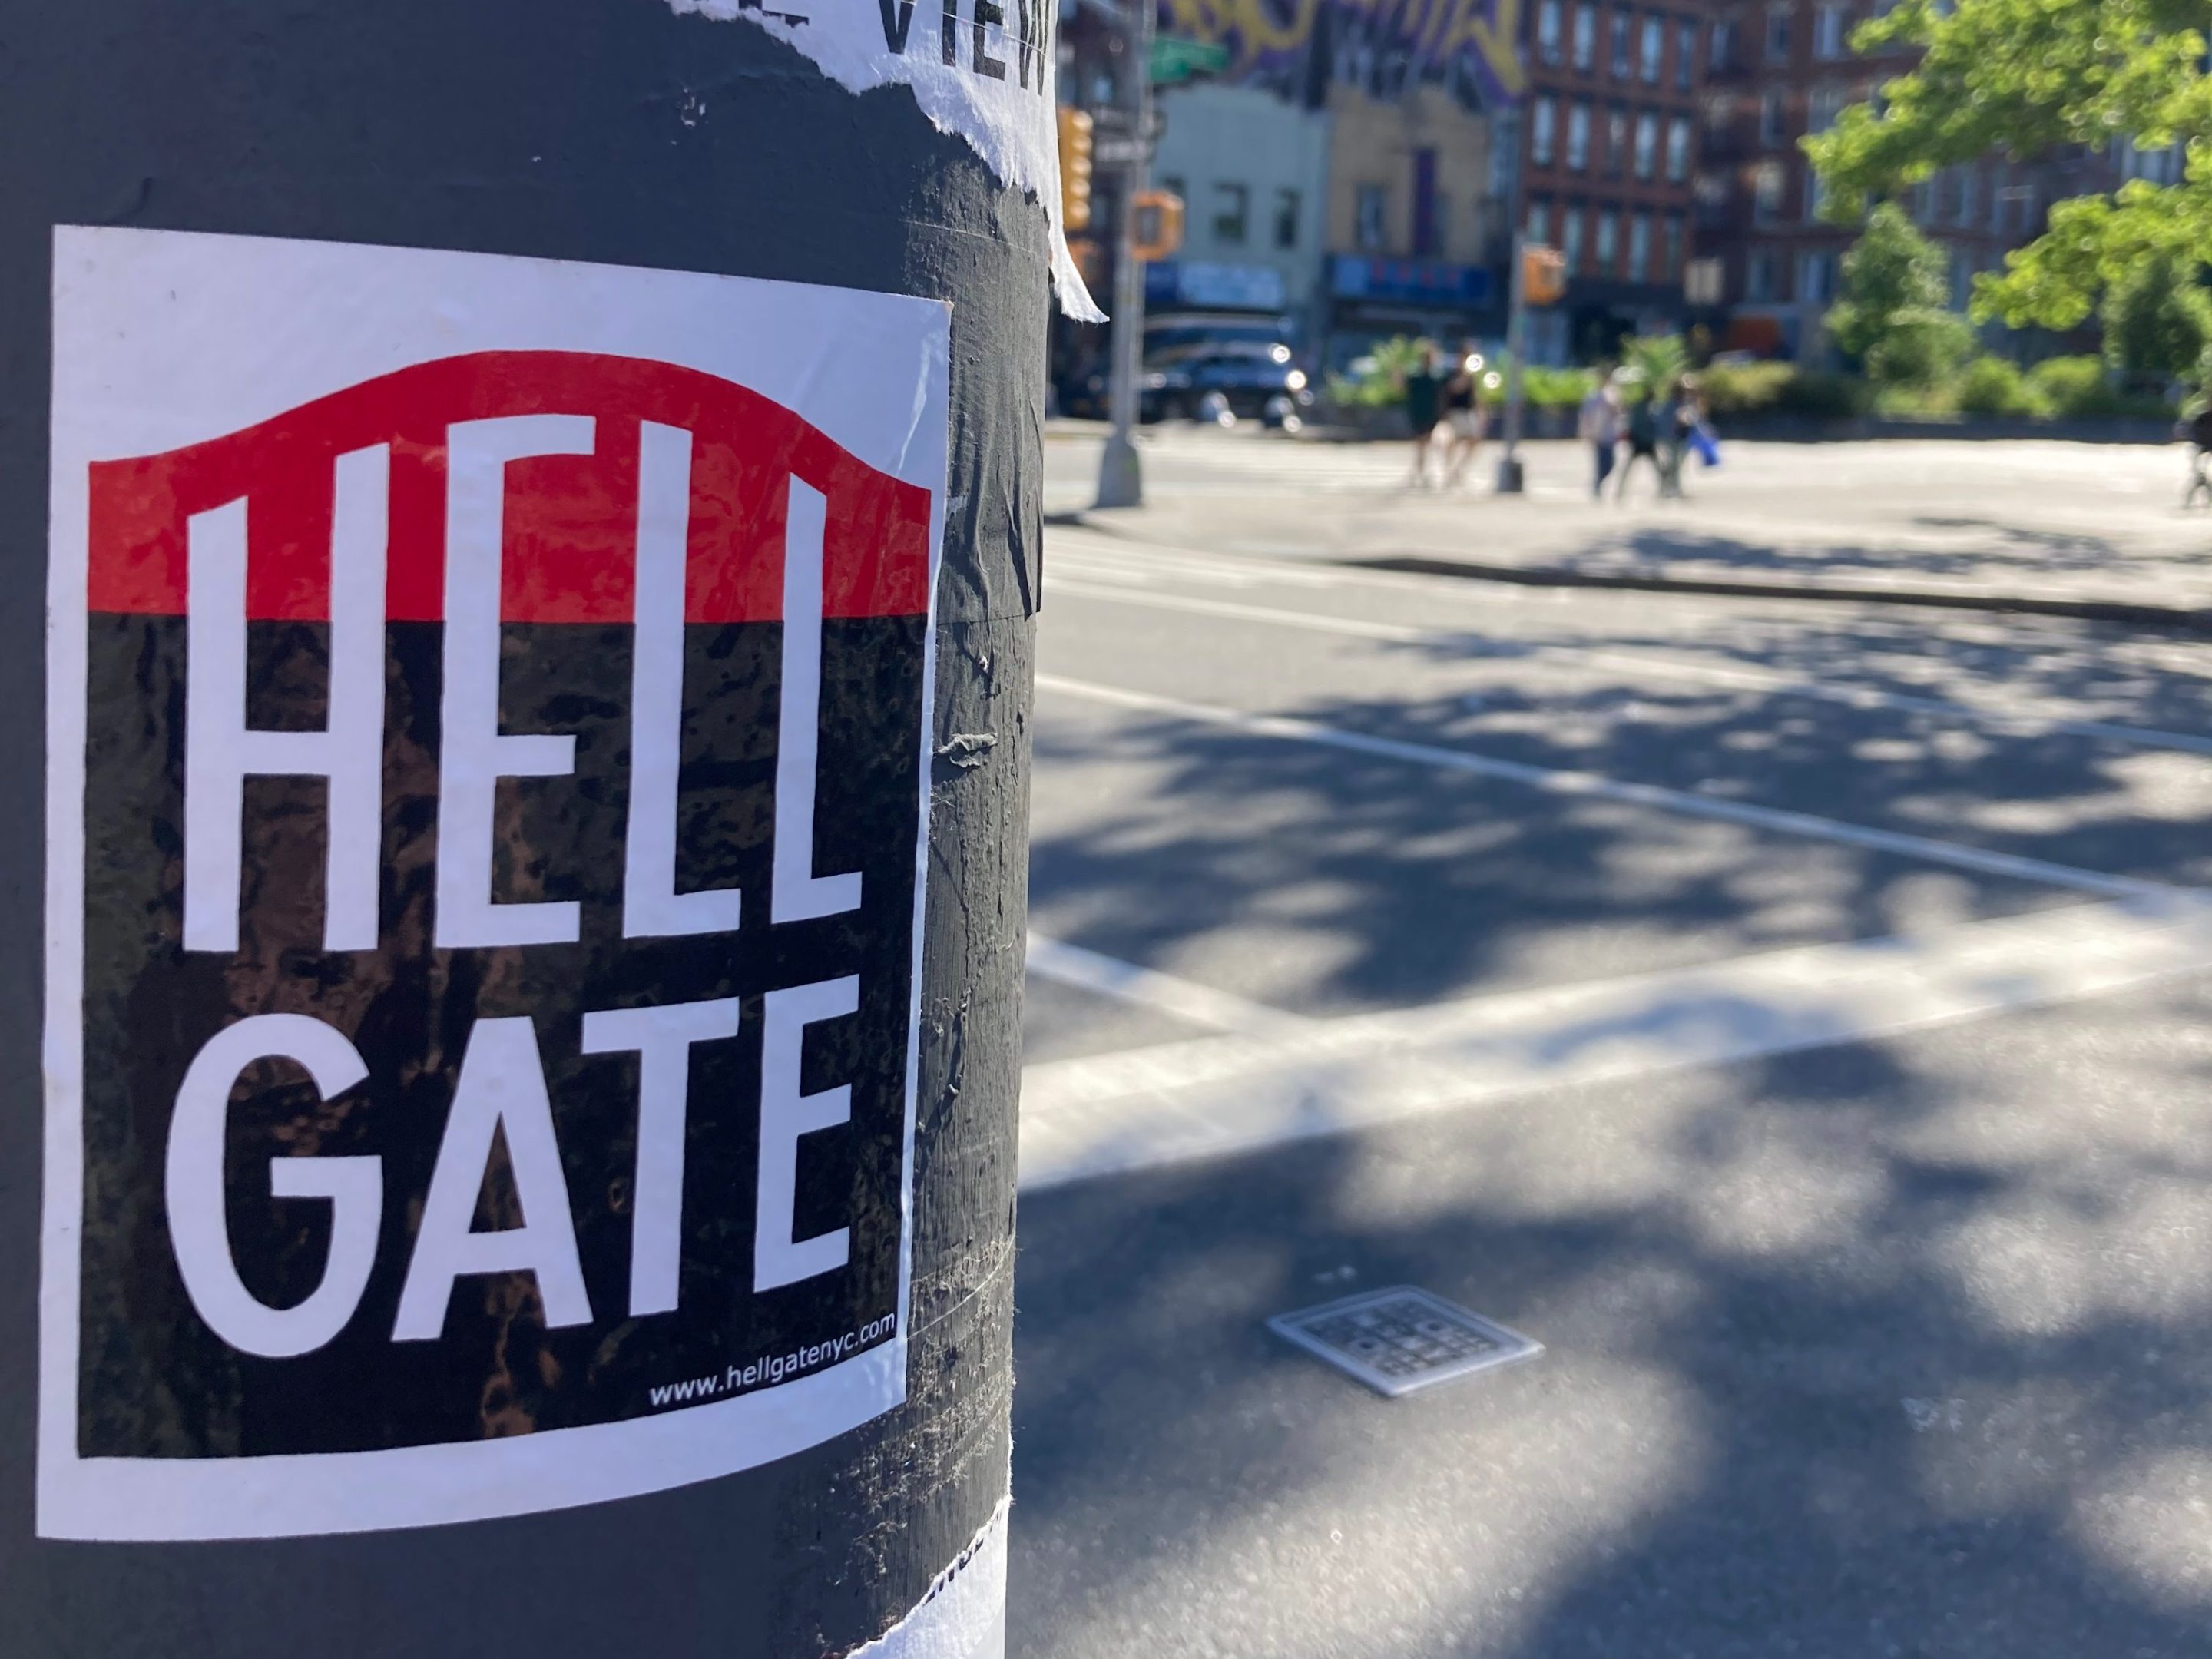 A Hell Gate Sticker on a lamppost in front of a sun-dappled city playground